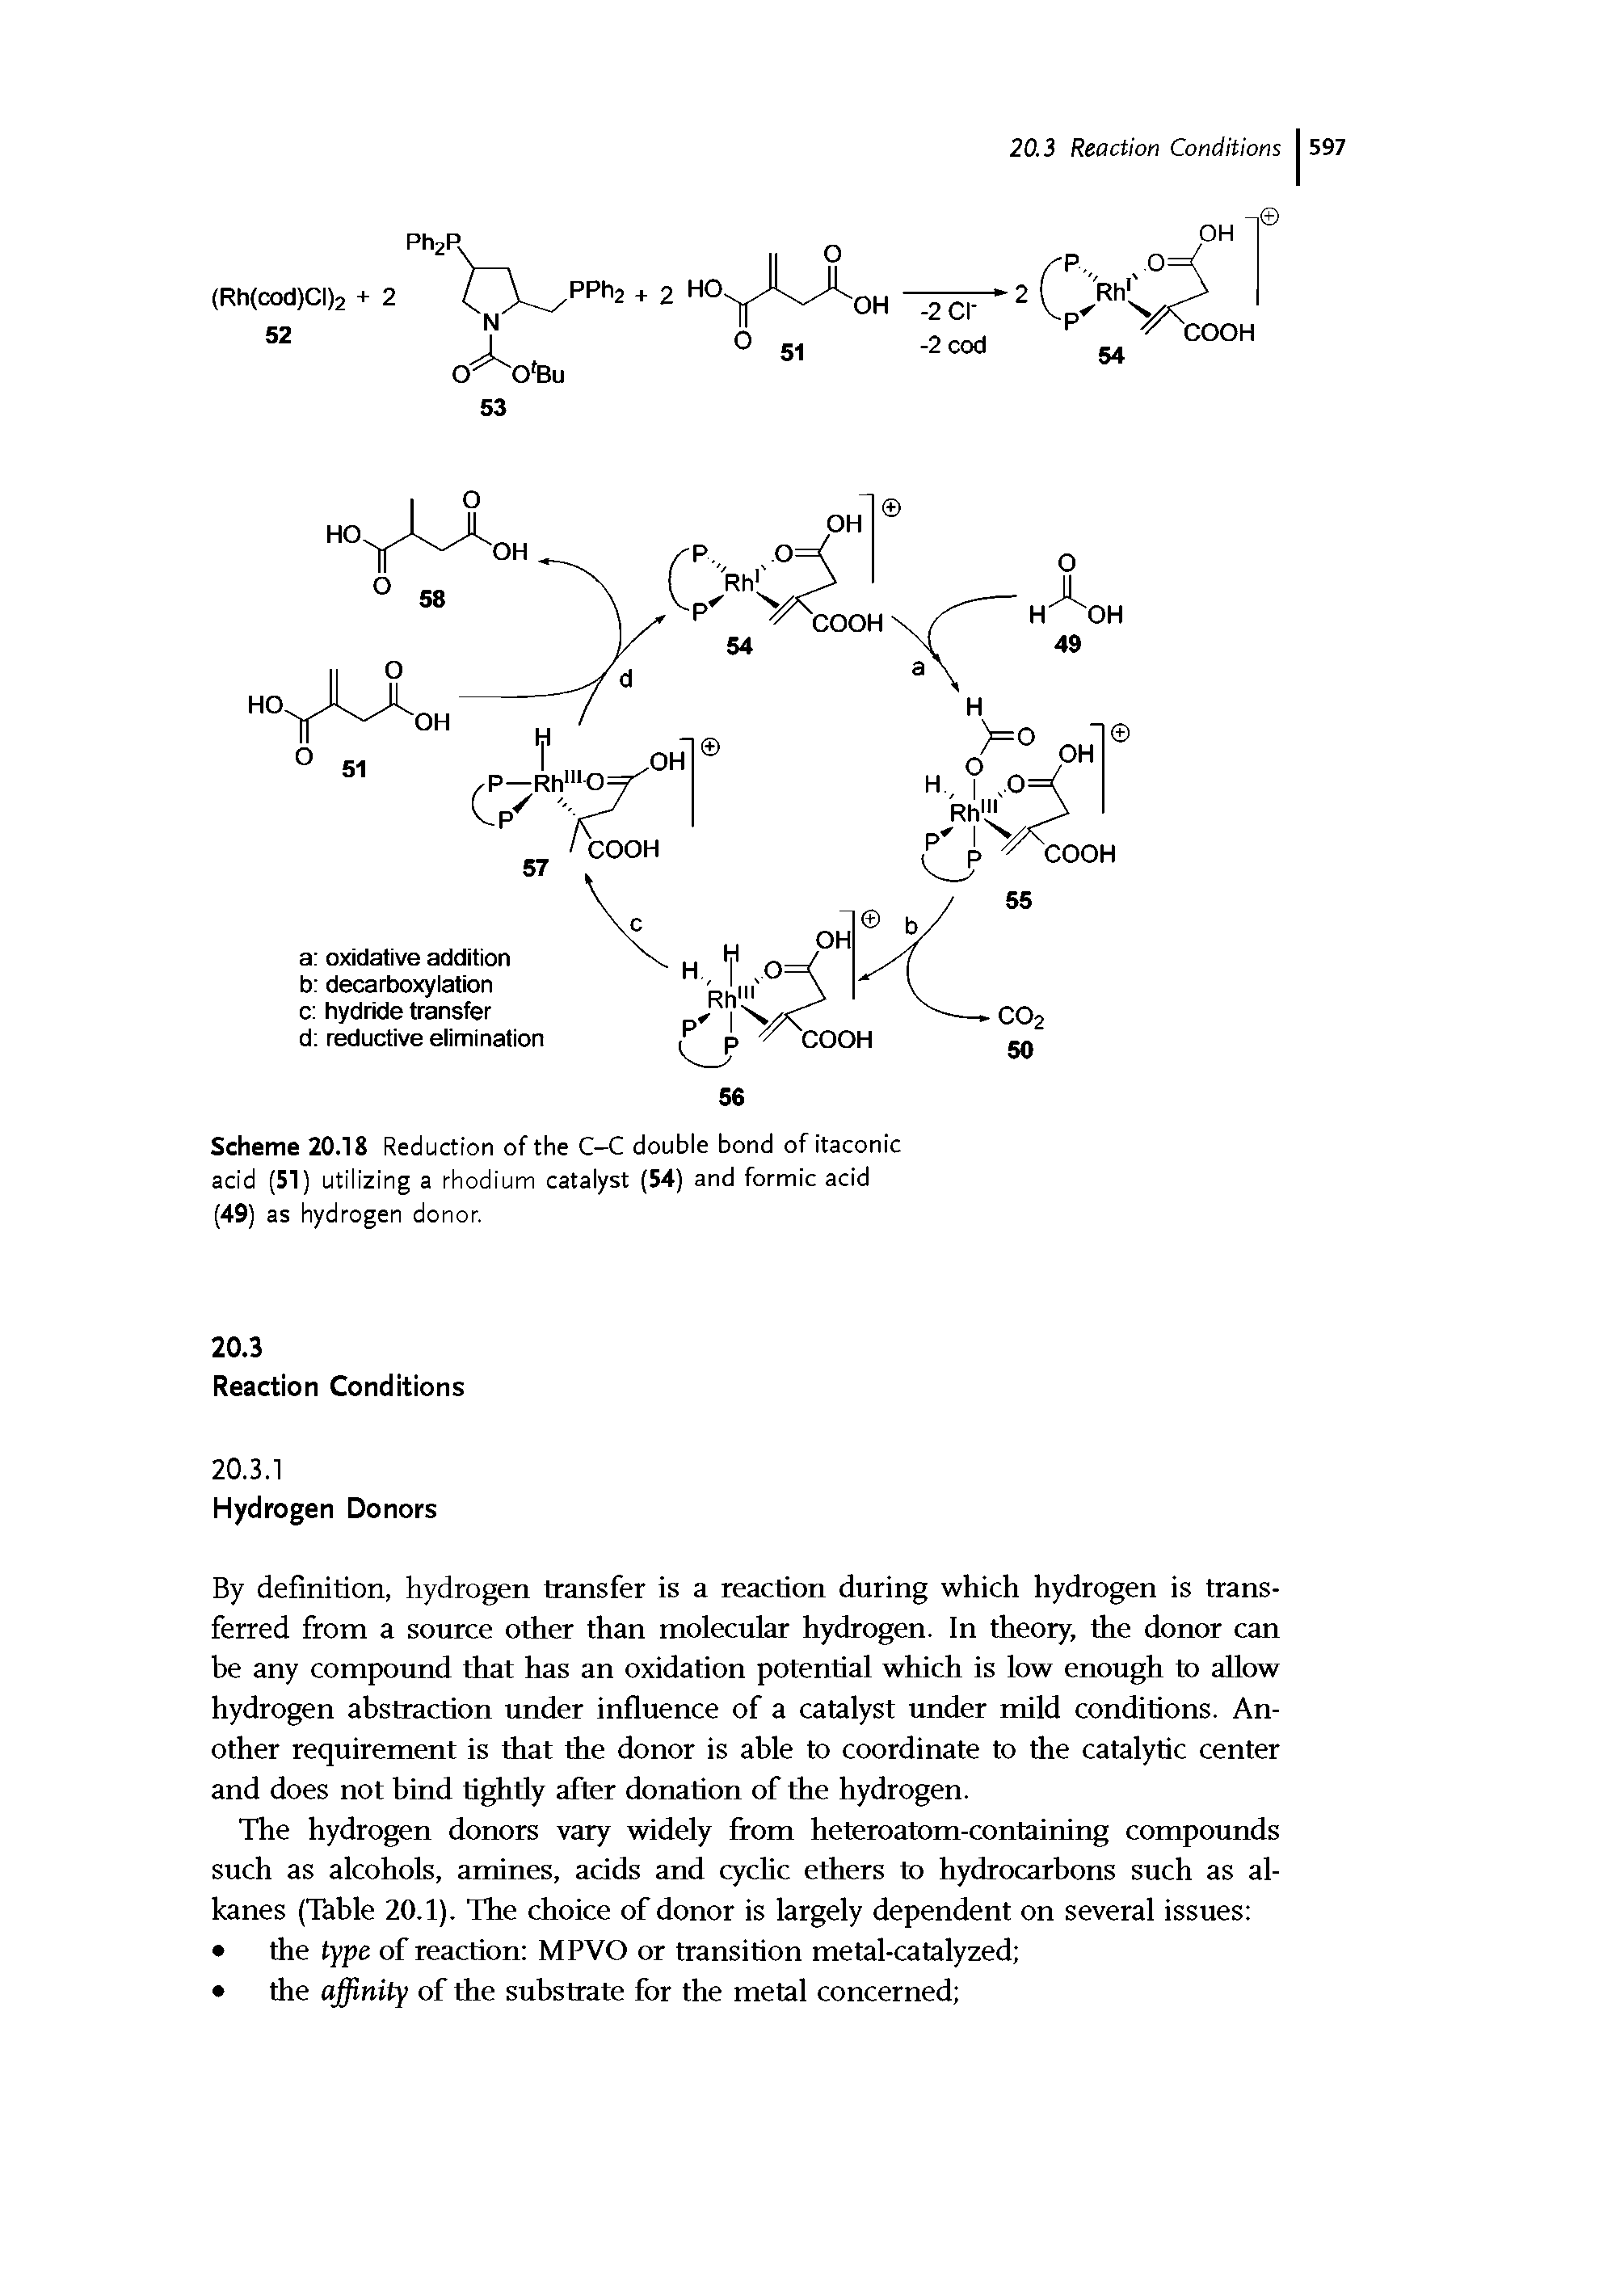 Scheme 20.18 Reduction of the C-C double bond of itaconic acid (51) utilizing a rhodium catalyst (54) and formic acid (49) as hydrogen donor.